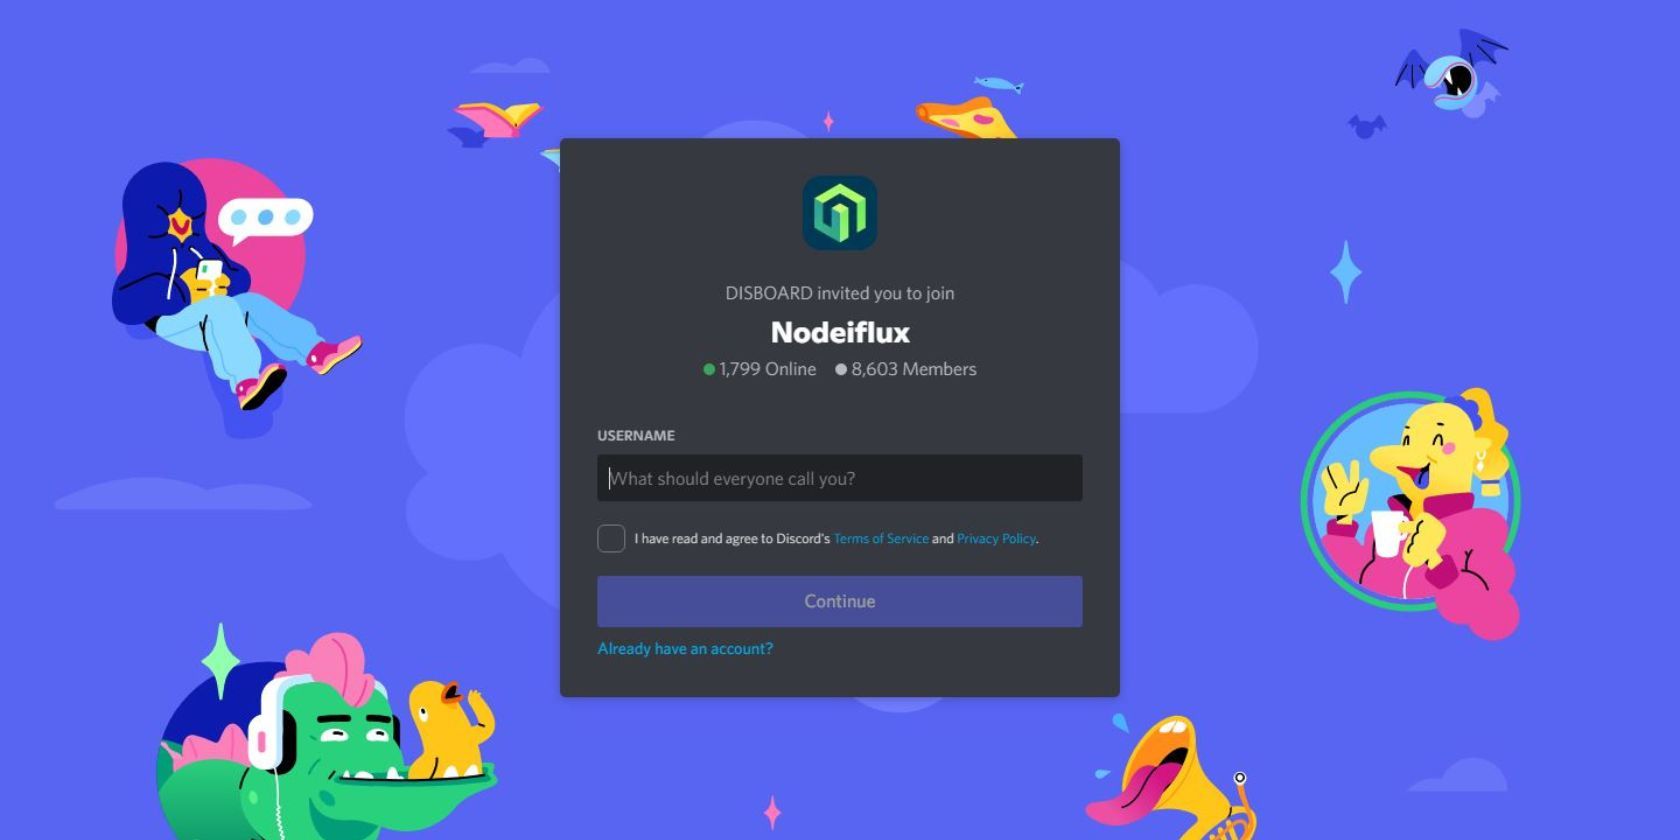 A screenshot of Nodeifux's invite page